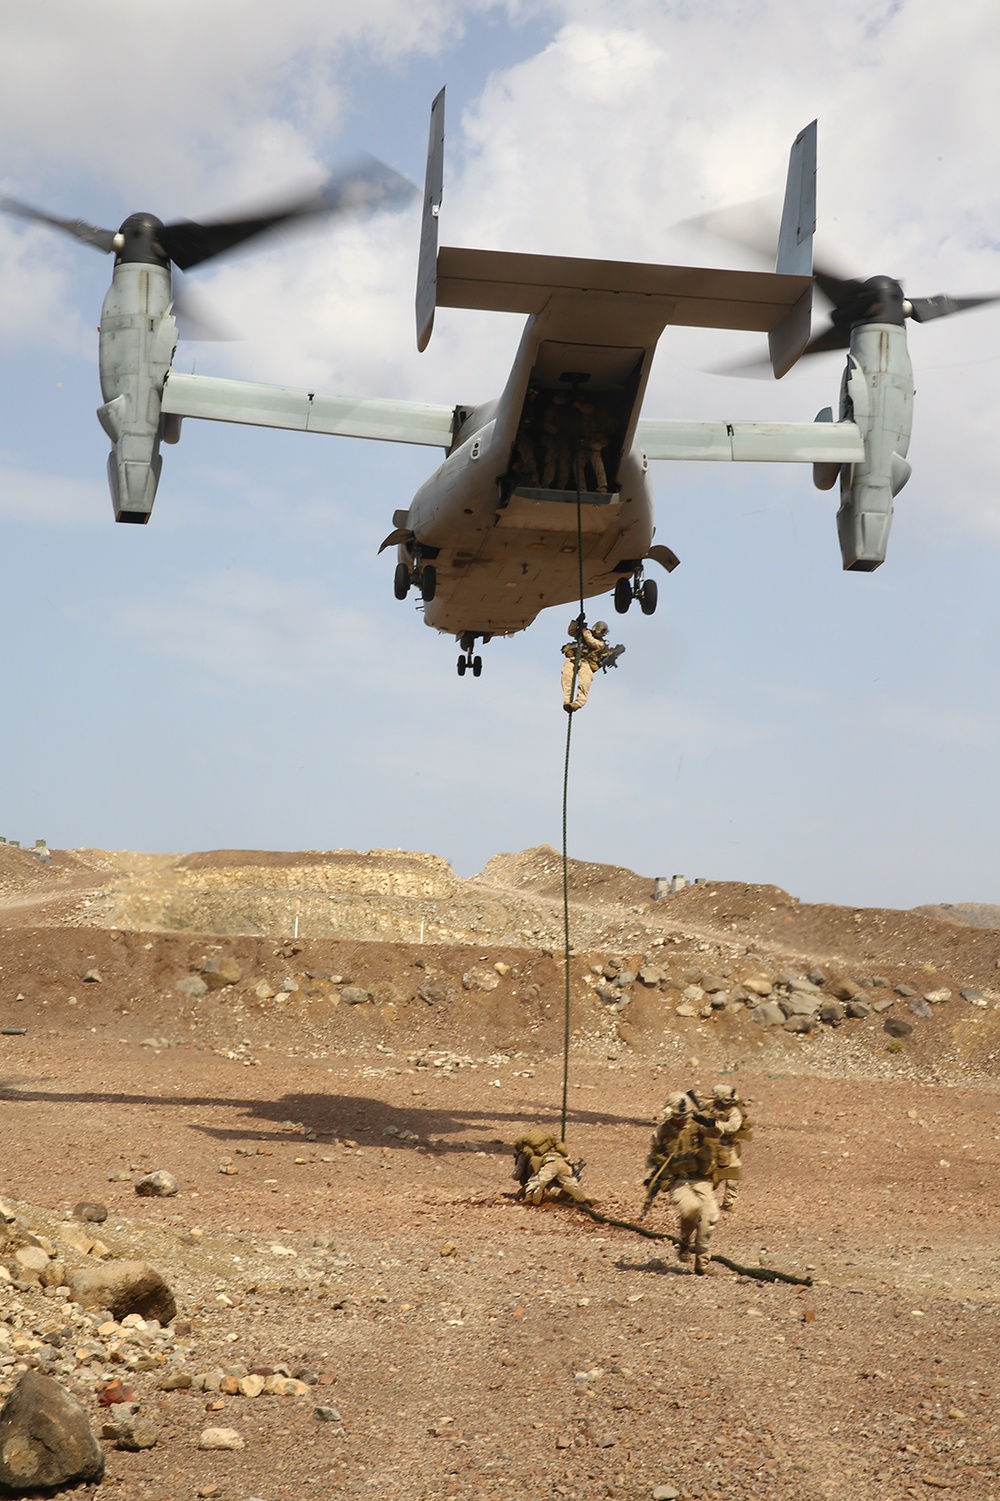 11th MEU Djibouti Sustainment Training: &quot;We Jump from Perfectly Good Helicopters&quot;